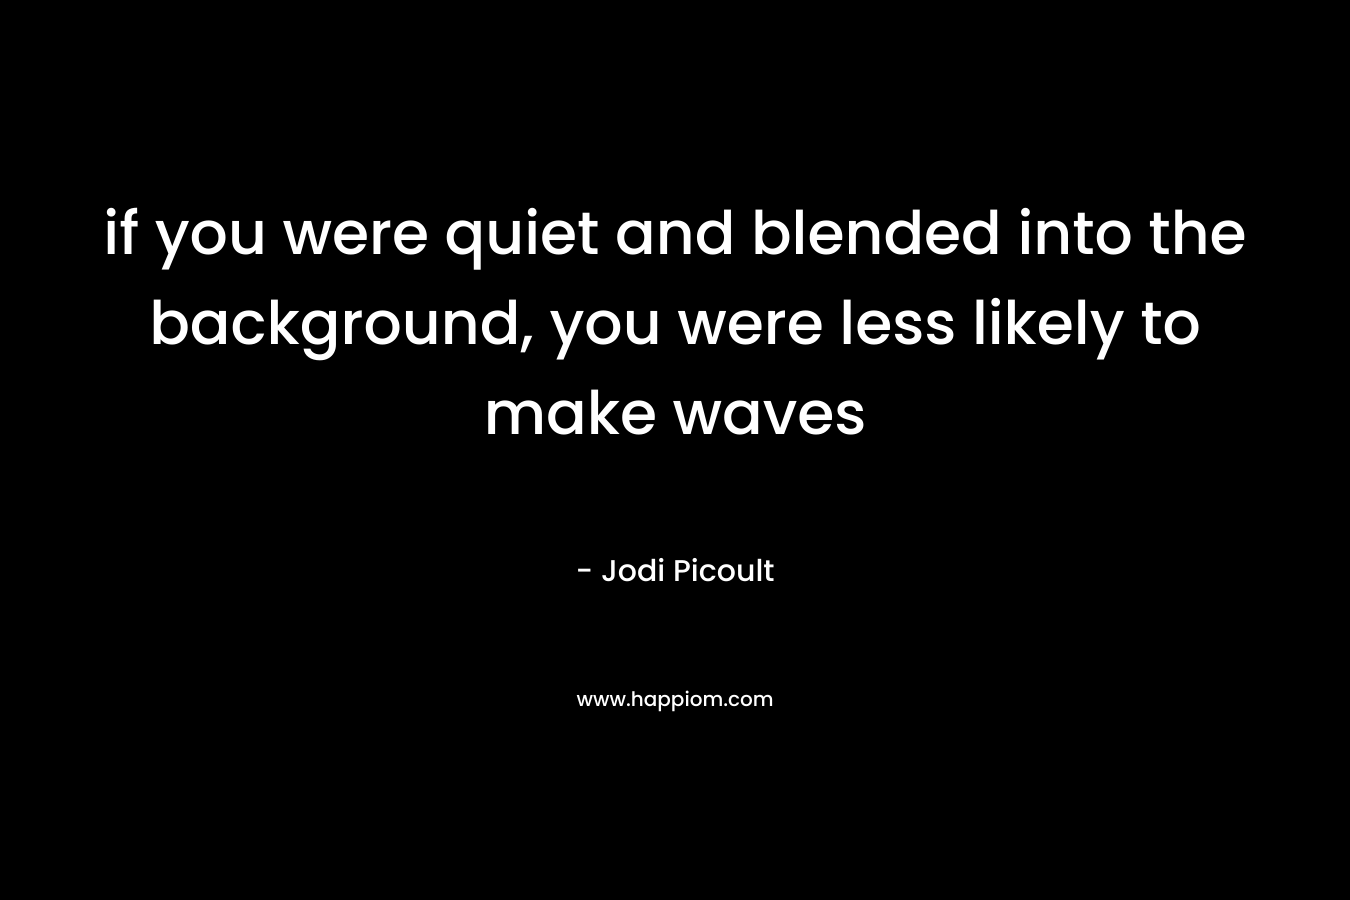 if you were quiet and blended into the background, you were less likely to make waves